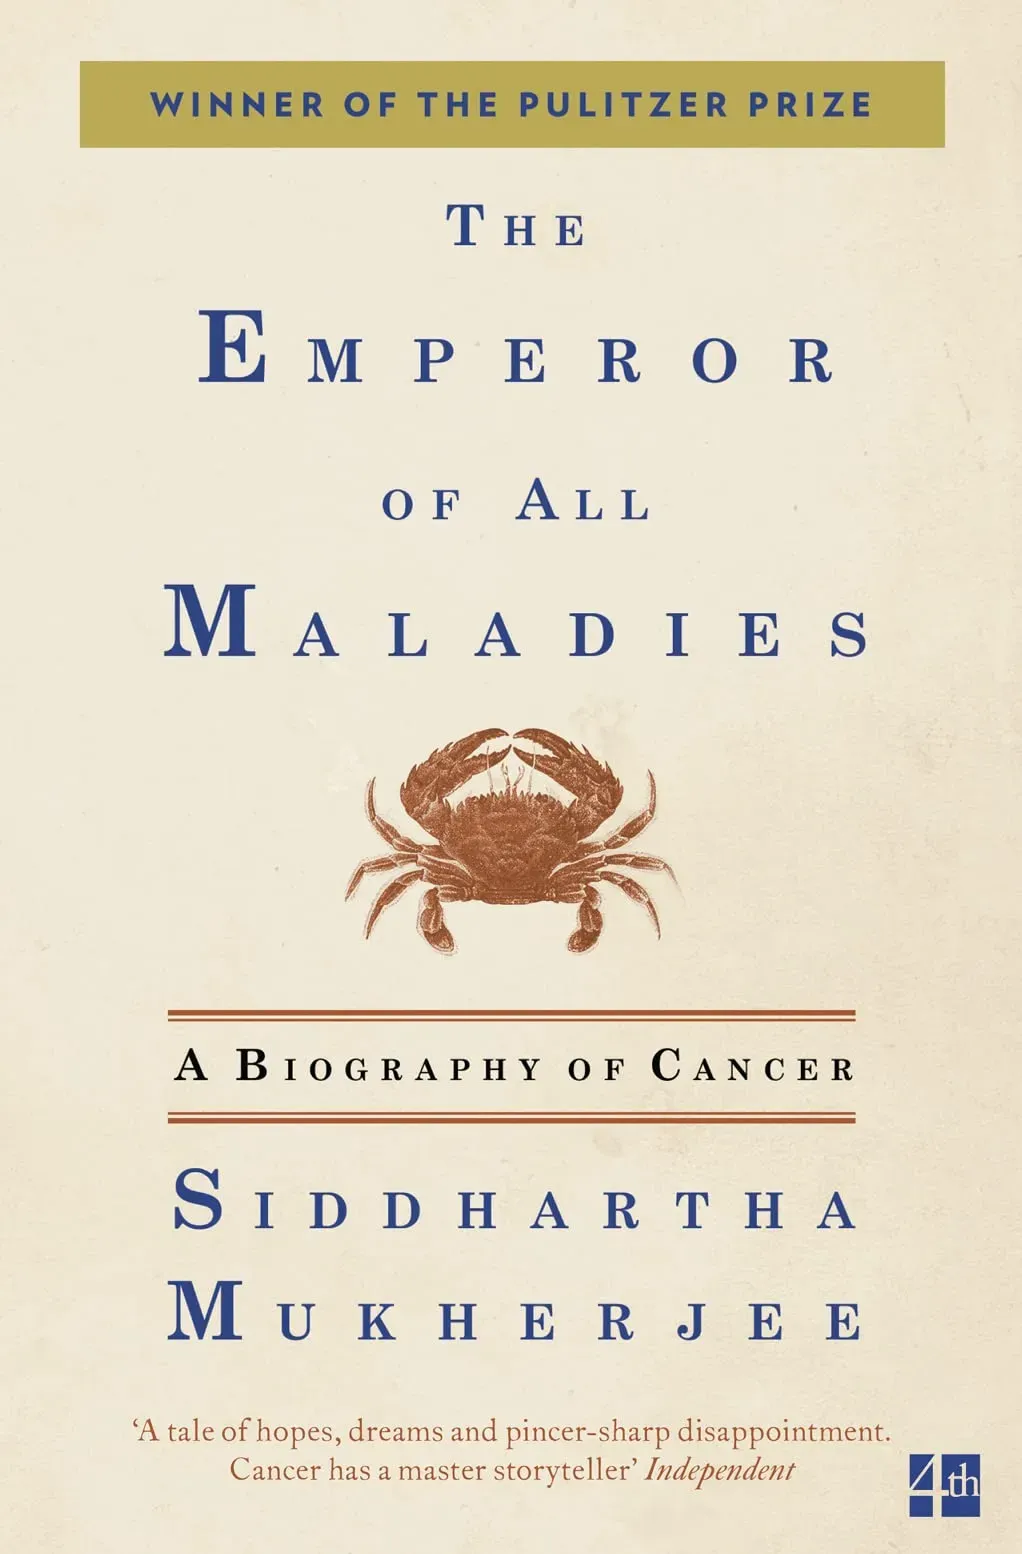 The Emperor of All Maladies: A Biography of Cancer: A Biography of Cancer. Winner of the Guardian First Book Award 2011. Winner of the Pulitzer Prize for Non-fiction 2011